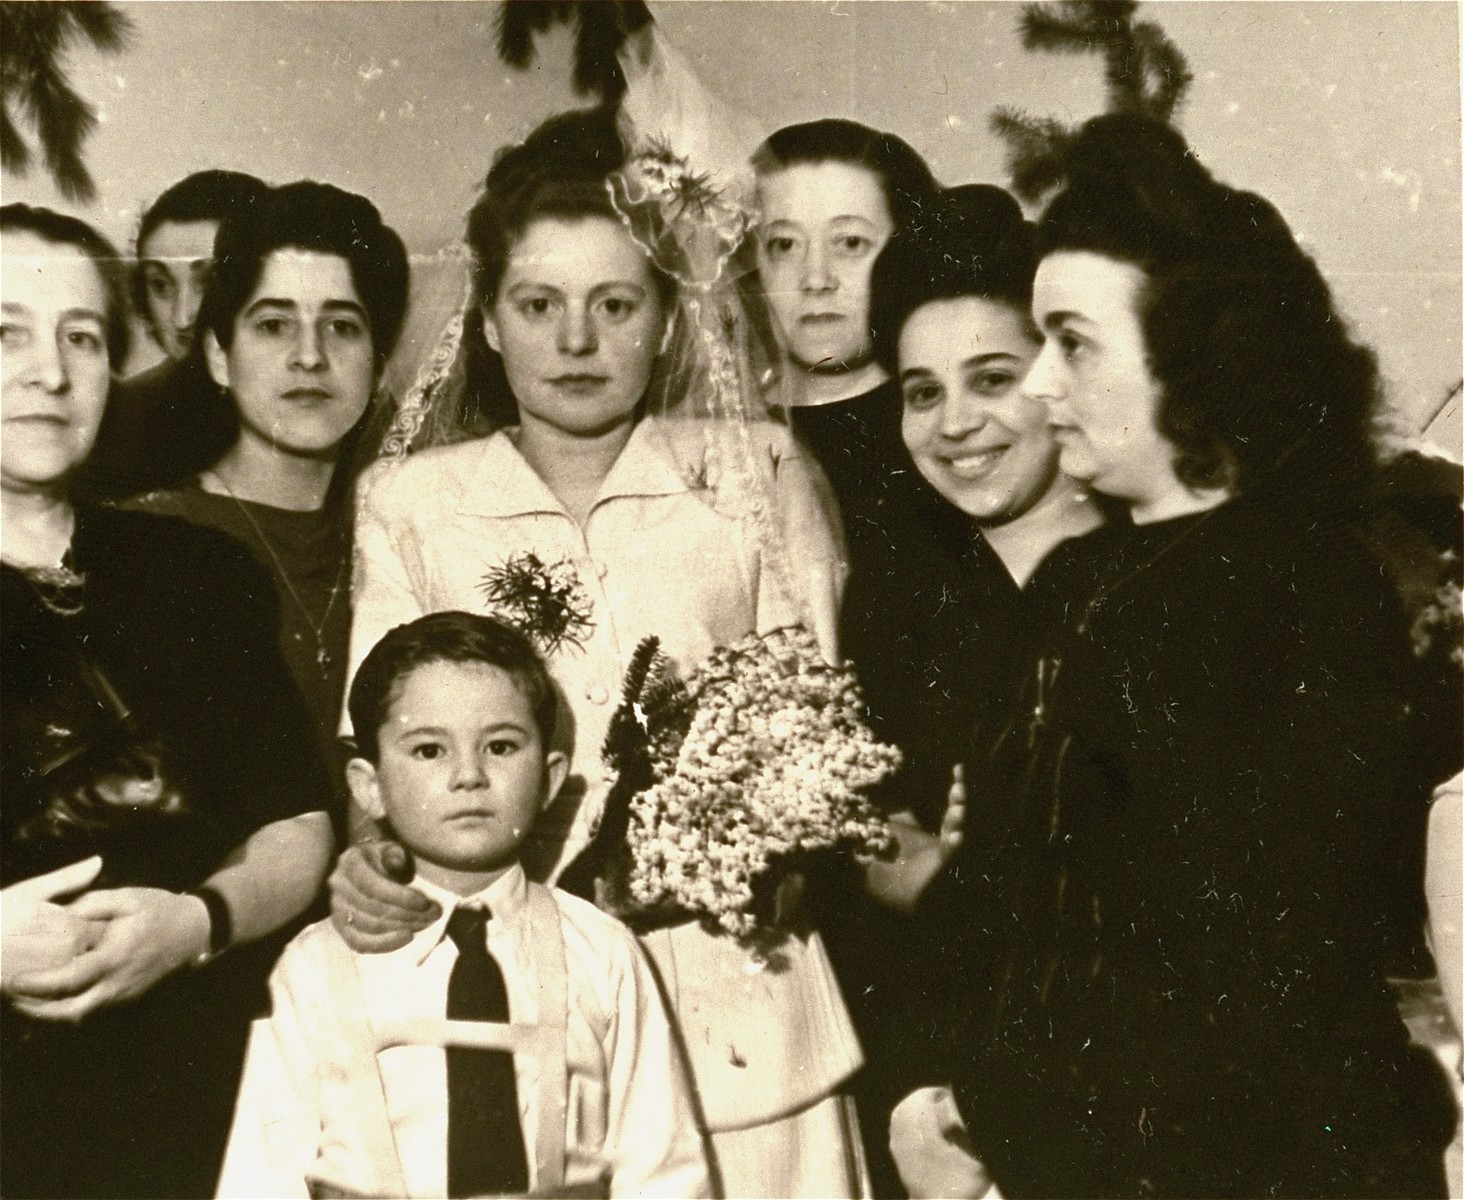 Group portrait of the Mandelbaum wedding party at the Bergen-Belsen displaced persons camp.  

Among those pictured are Jurek Kaiser (the child); Lola Mandelbaum (the bride) and Mania Zaks (second from the right).